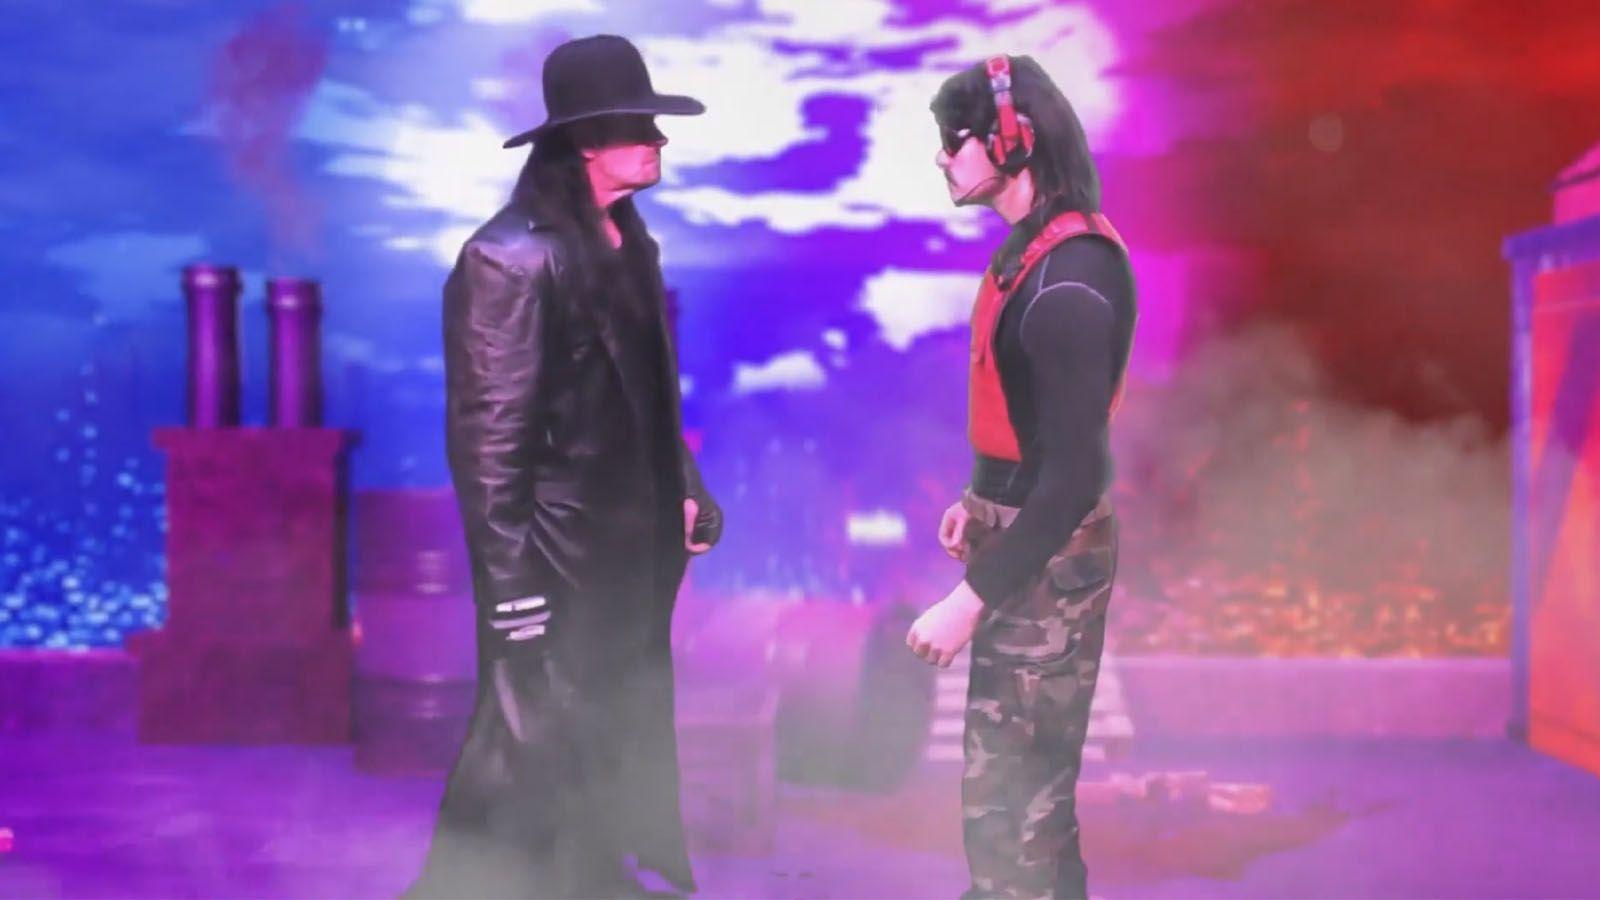 Dr Disrespect and The Undertaker face off